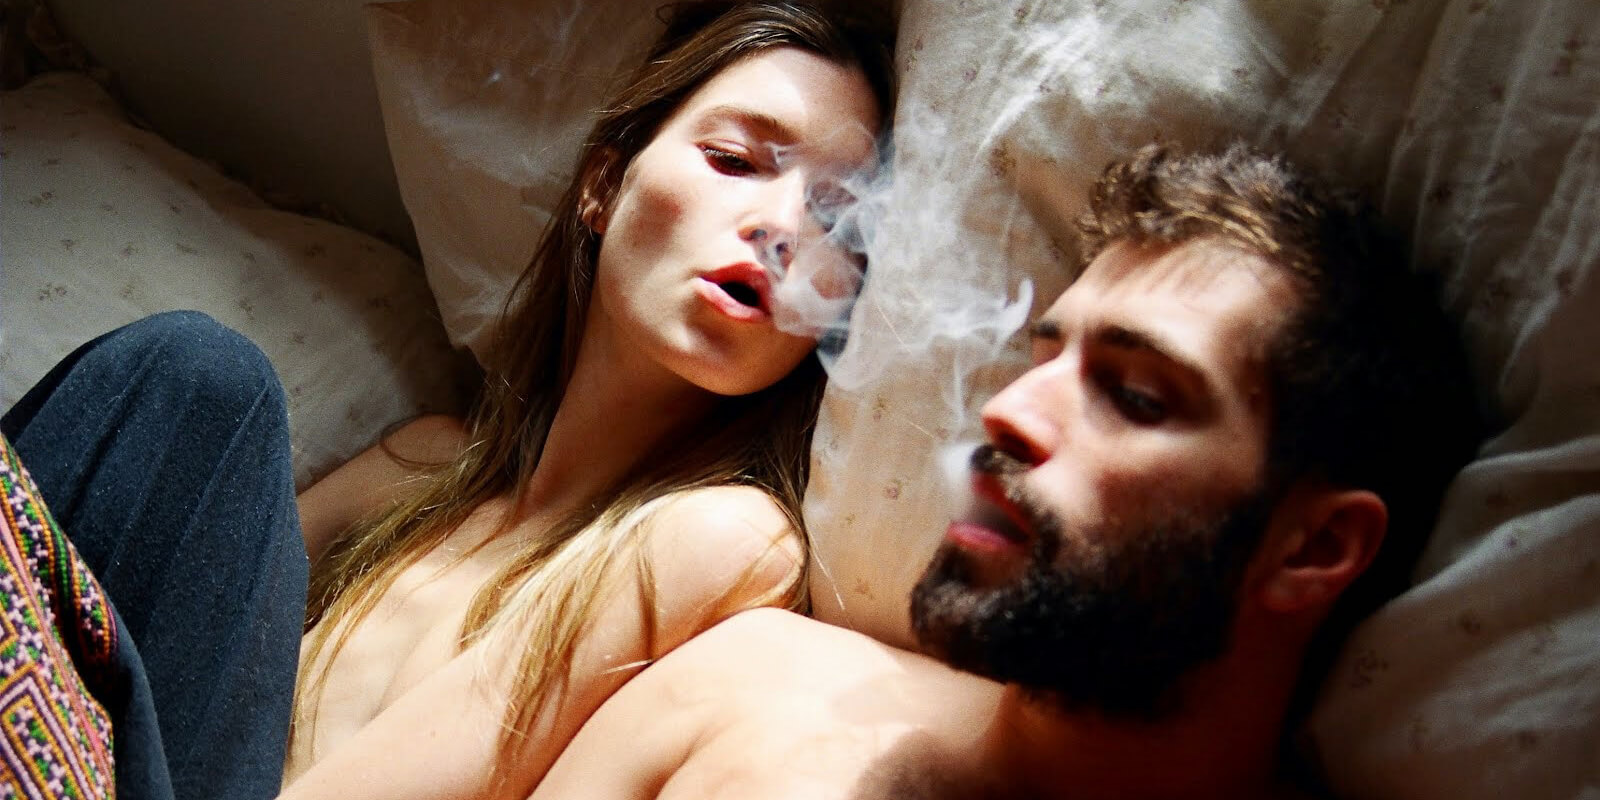 Study Shows Smoking A Little Weed Before Sex Makes It More Pleasurable.